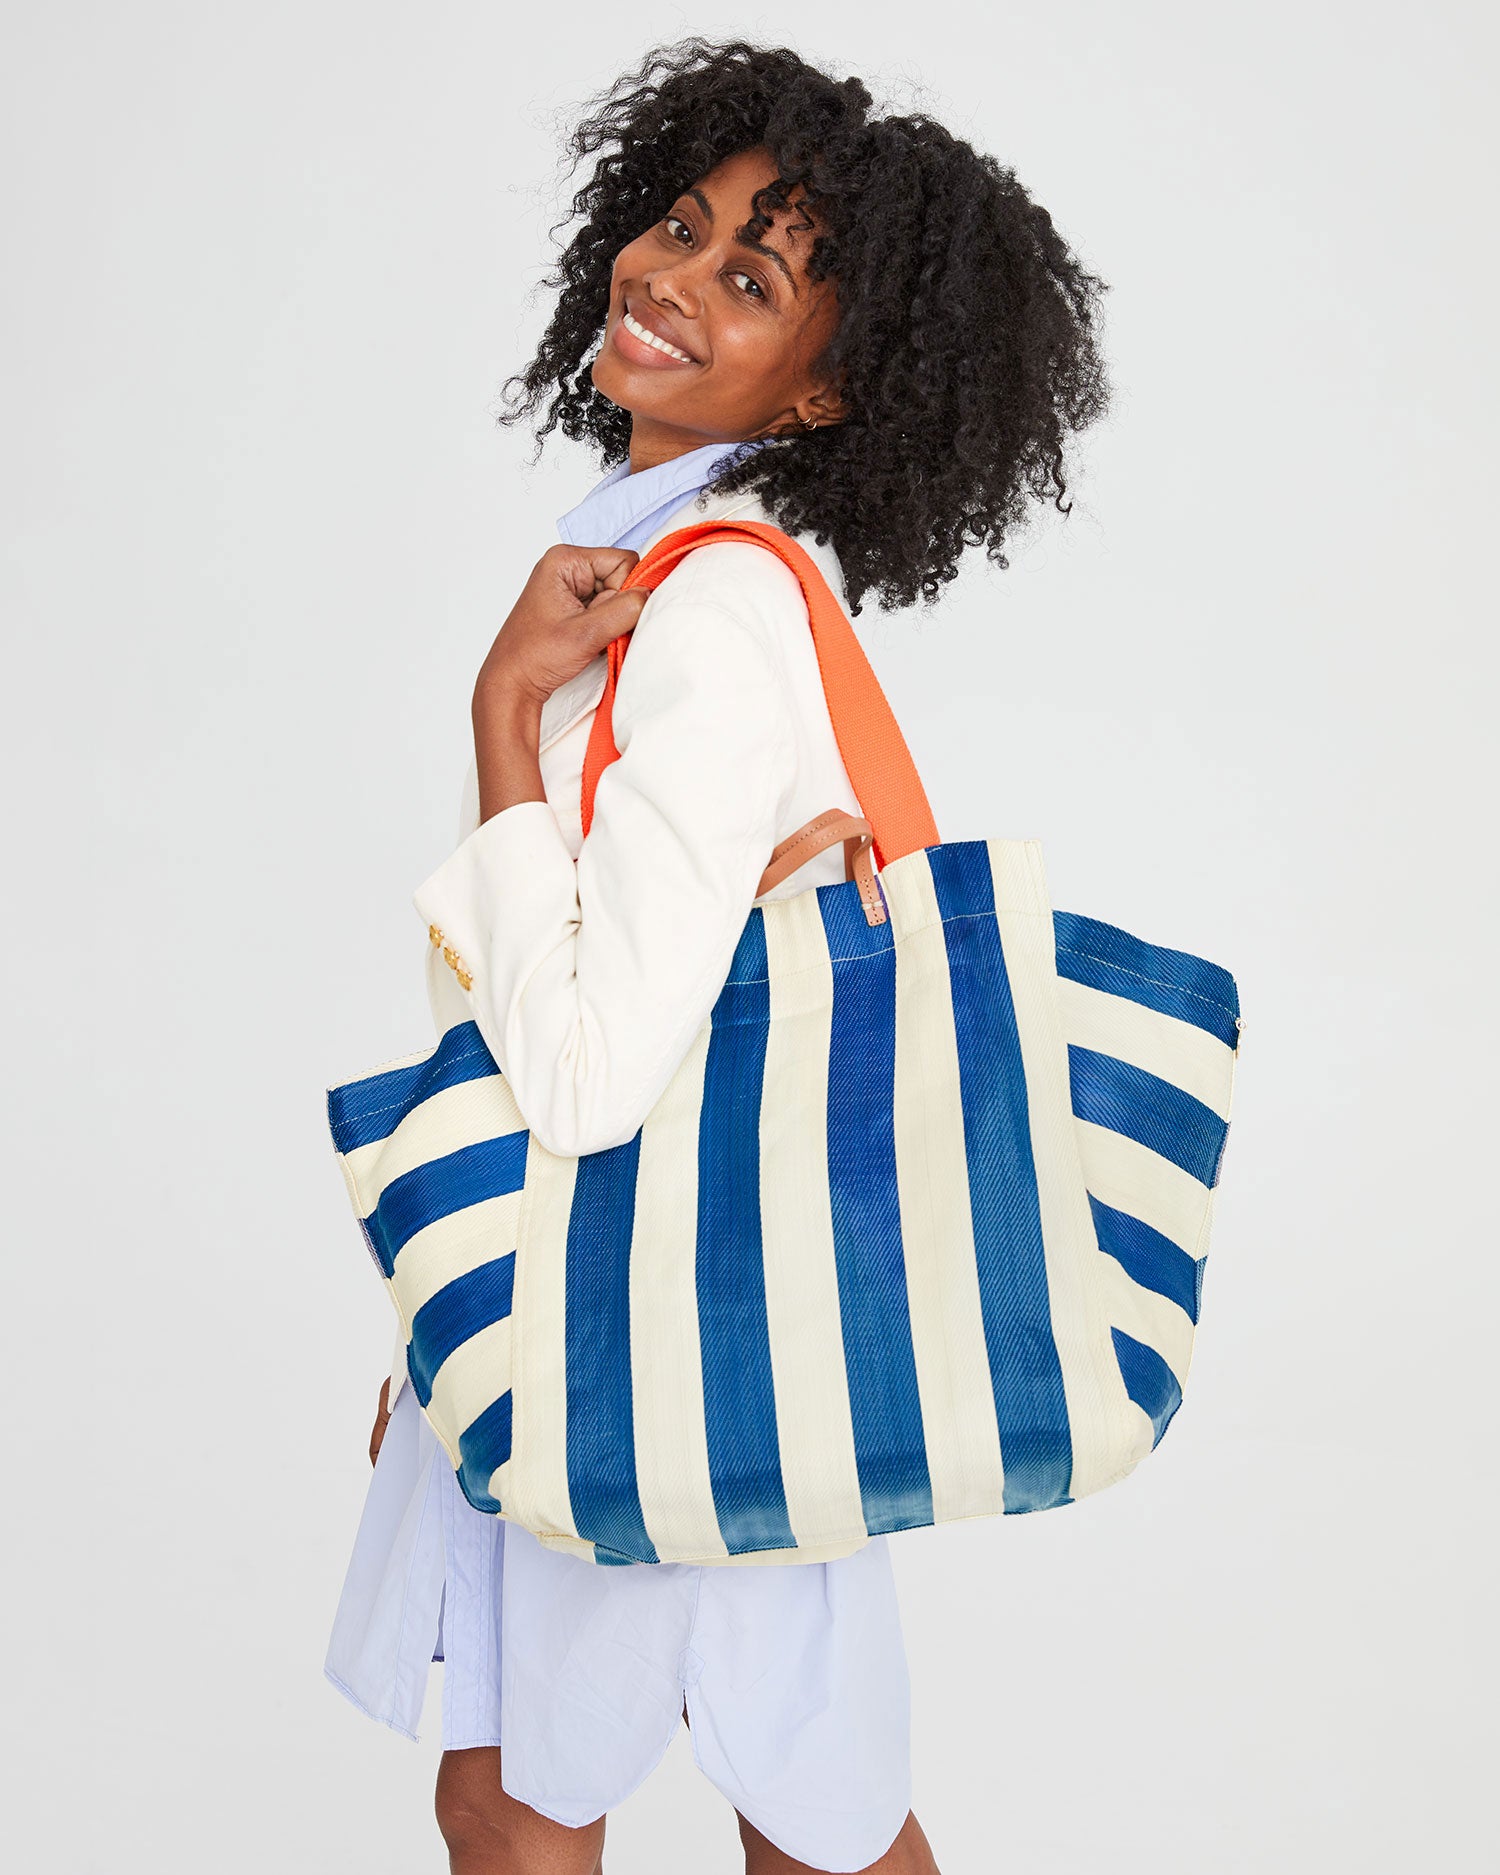 Mecca smiling with the Azul & Shell Beach Tote on her shoulder